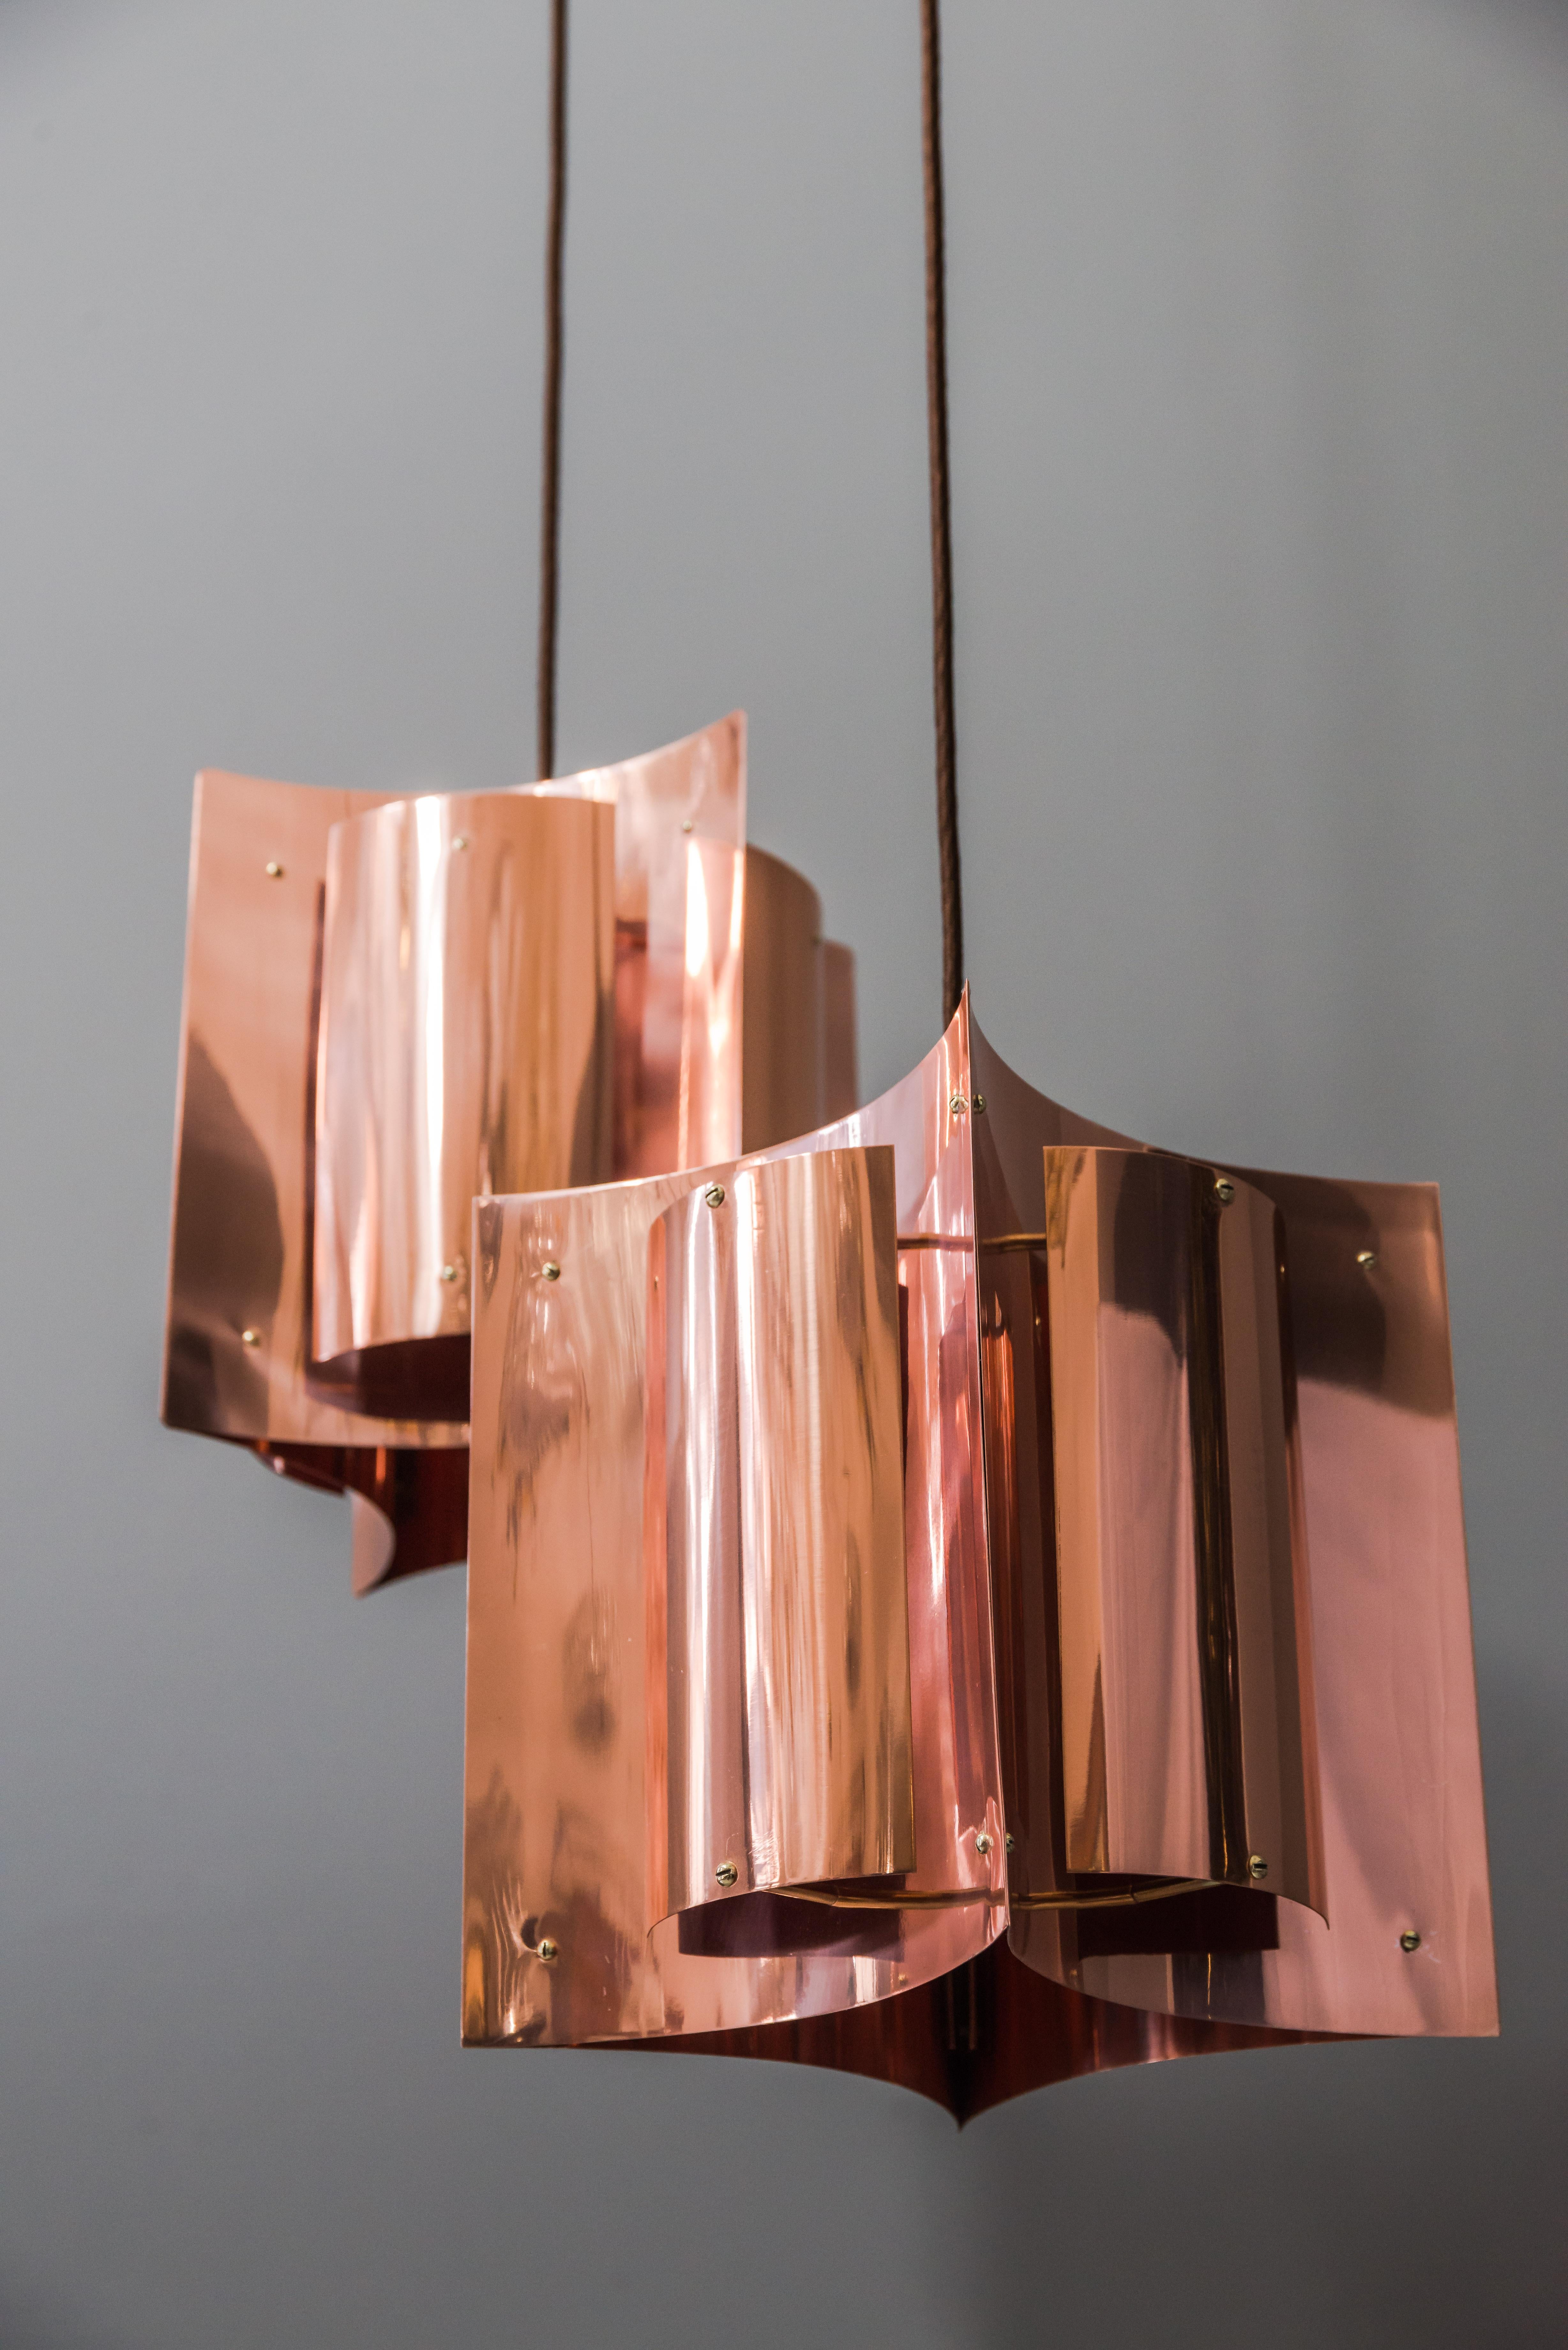 Mid-20th Century Danish Copper Pendant Lamp by Svend Aage Holm Sørensen, 1960s For Sale